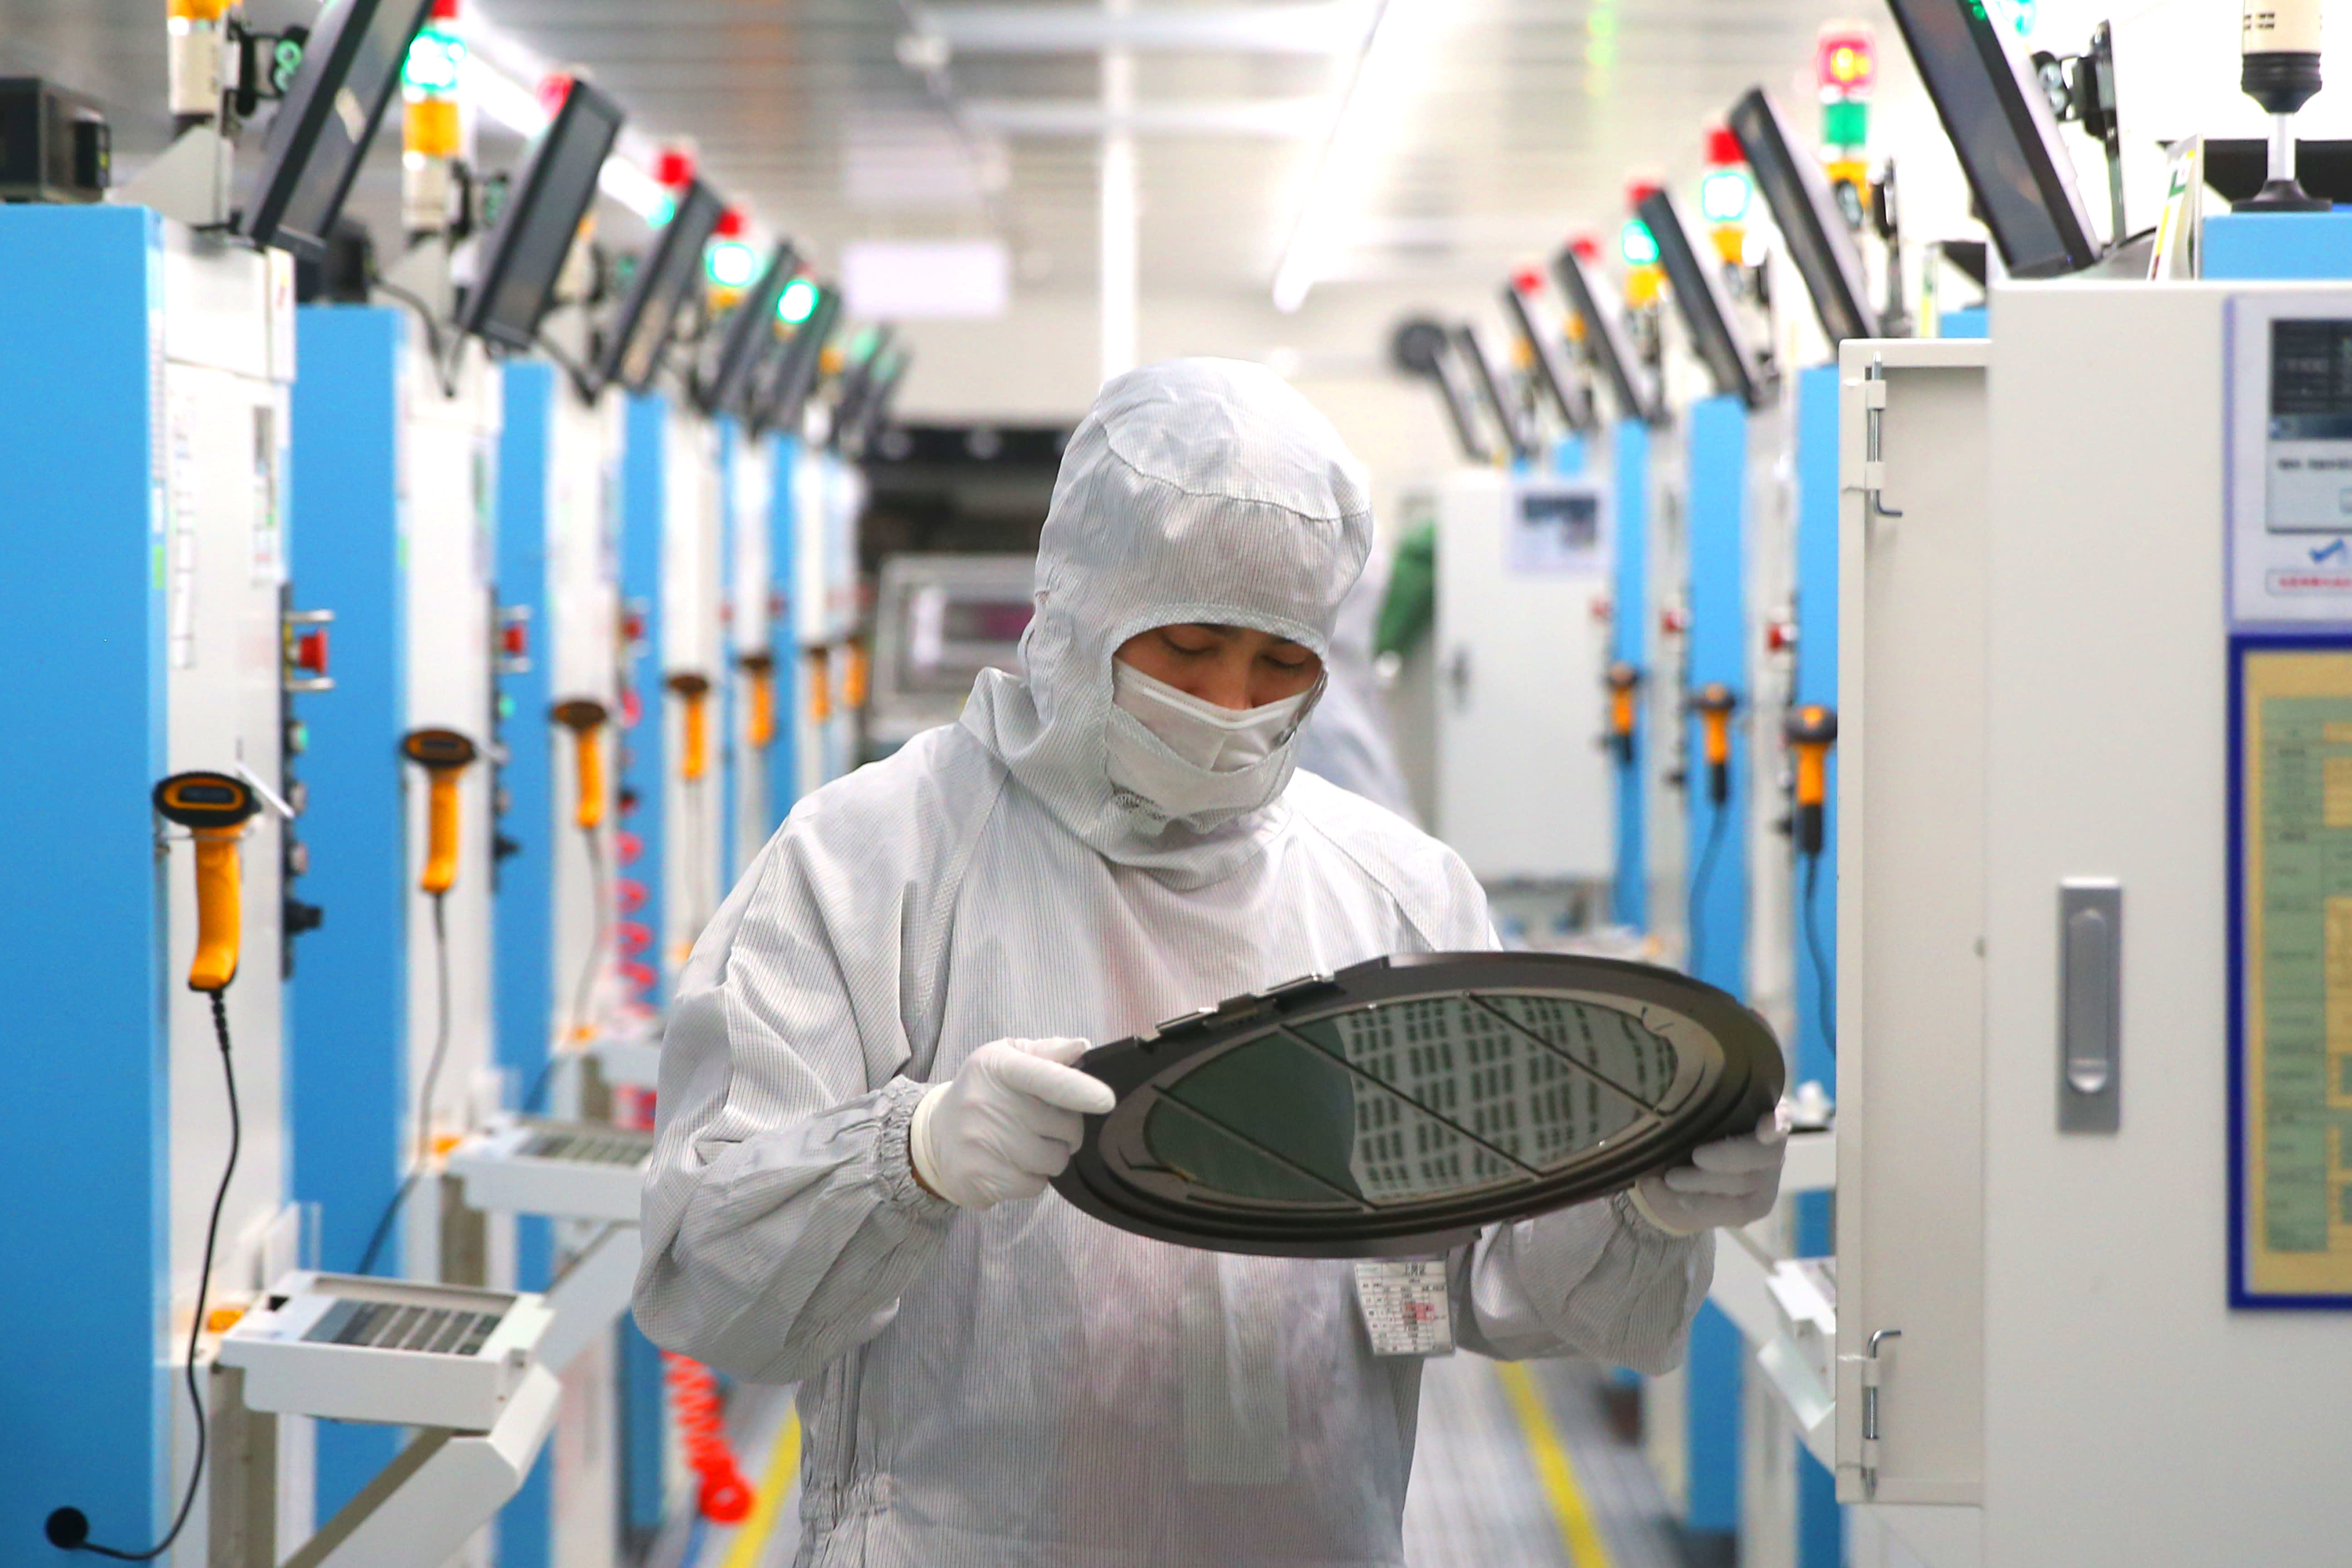 China is still ‘three or four generations’ away from developing latest semiconductor tech, IDC says